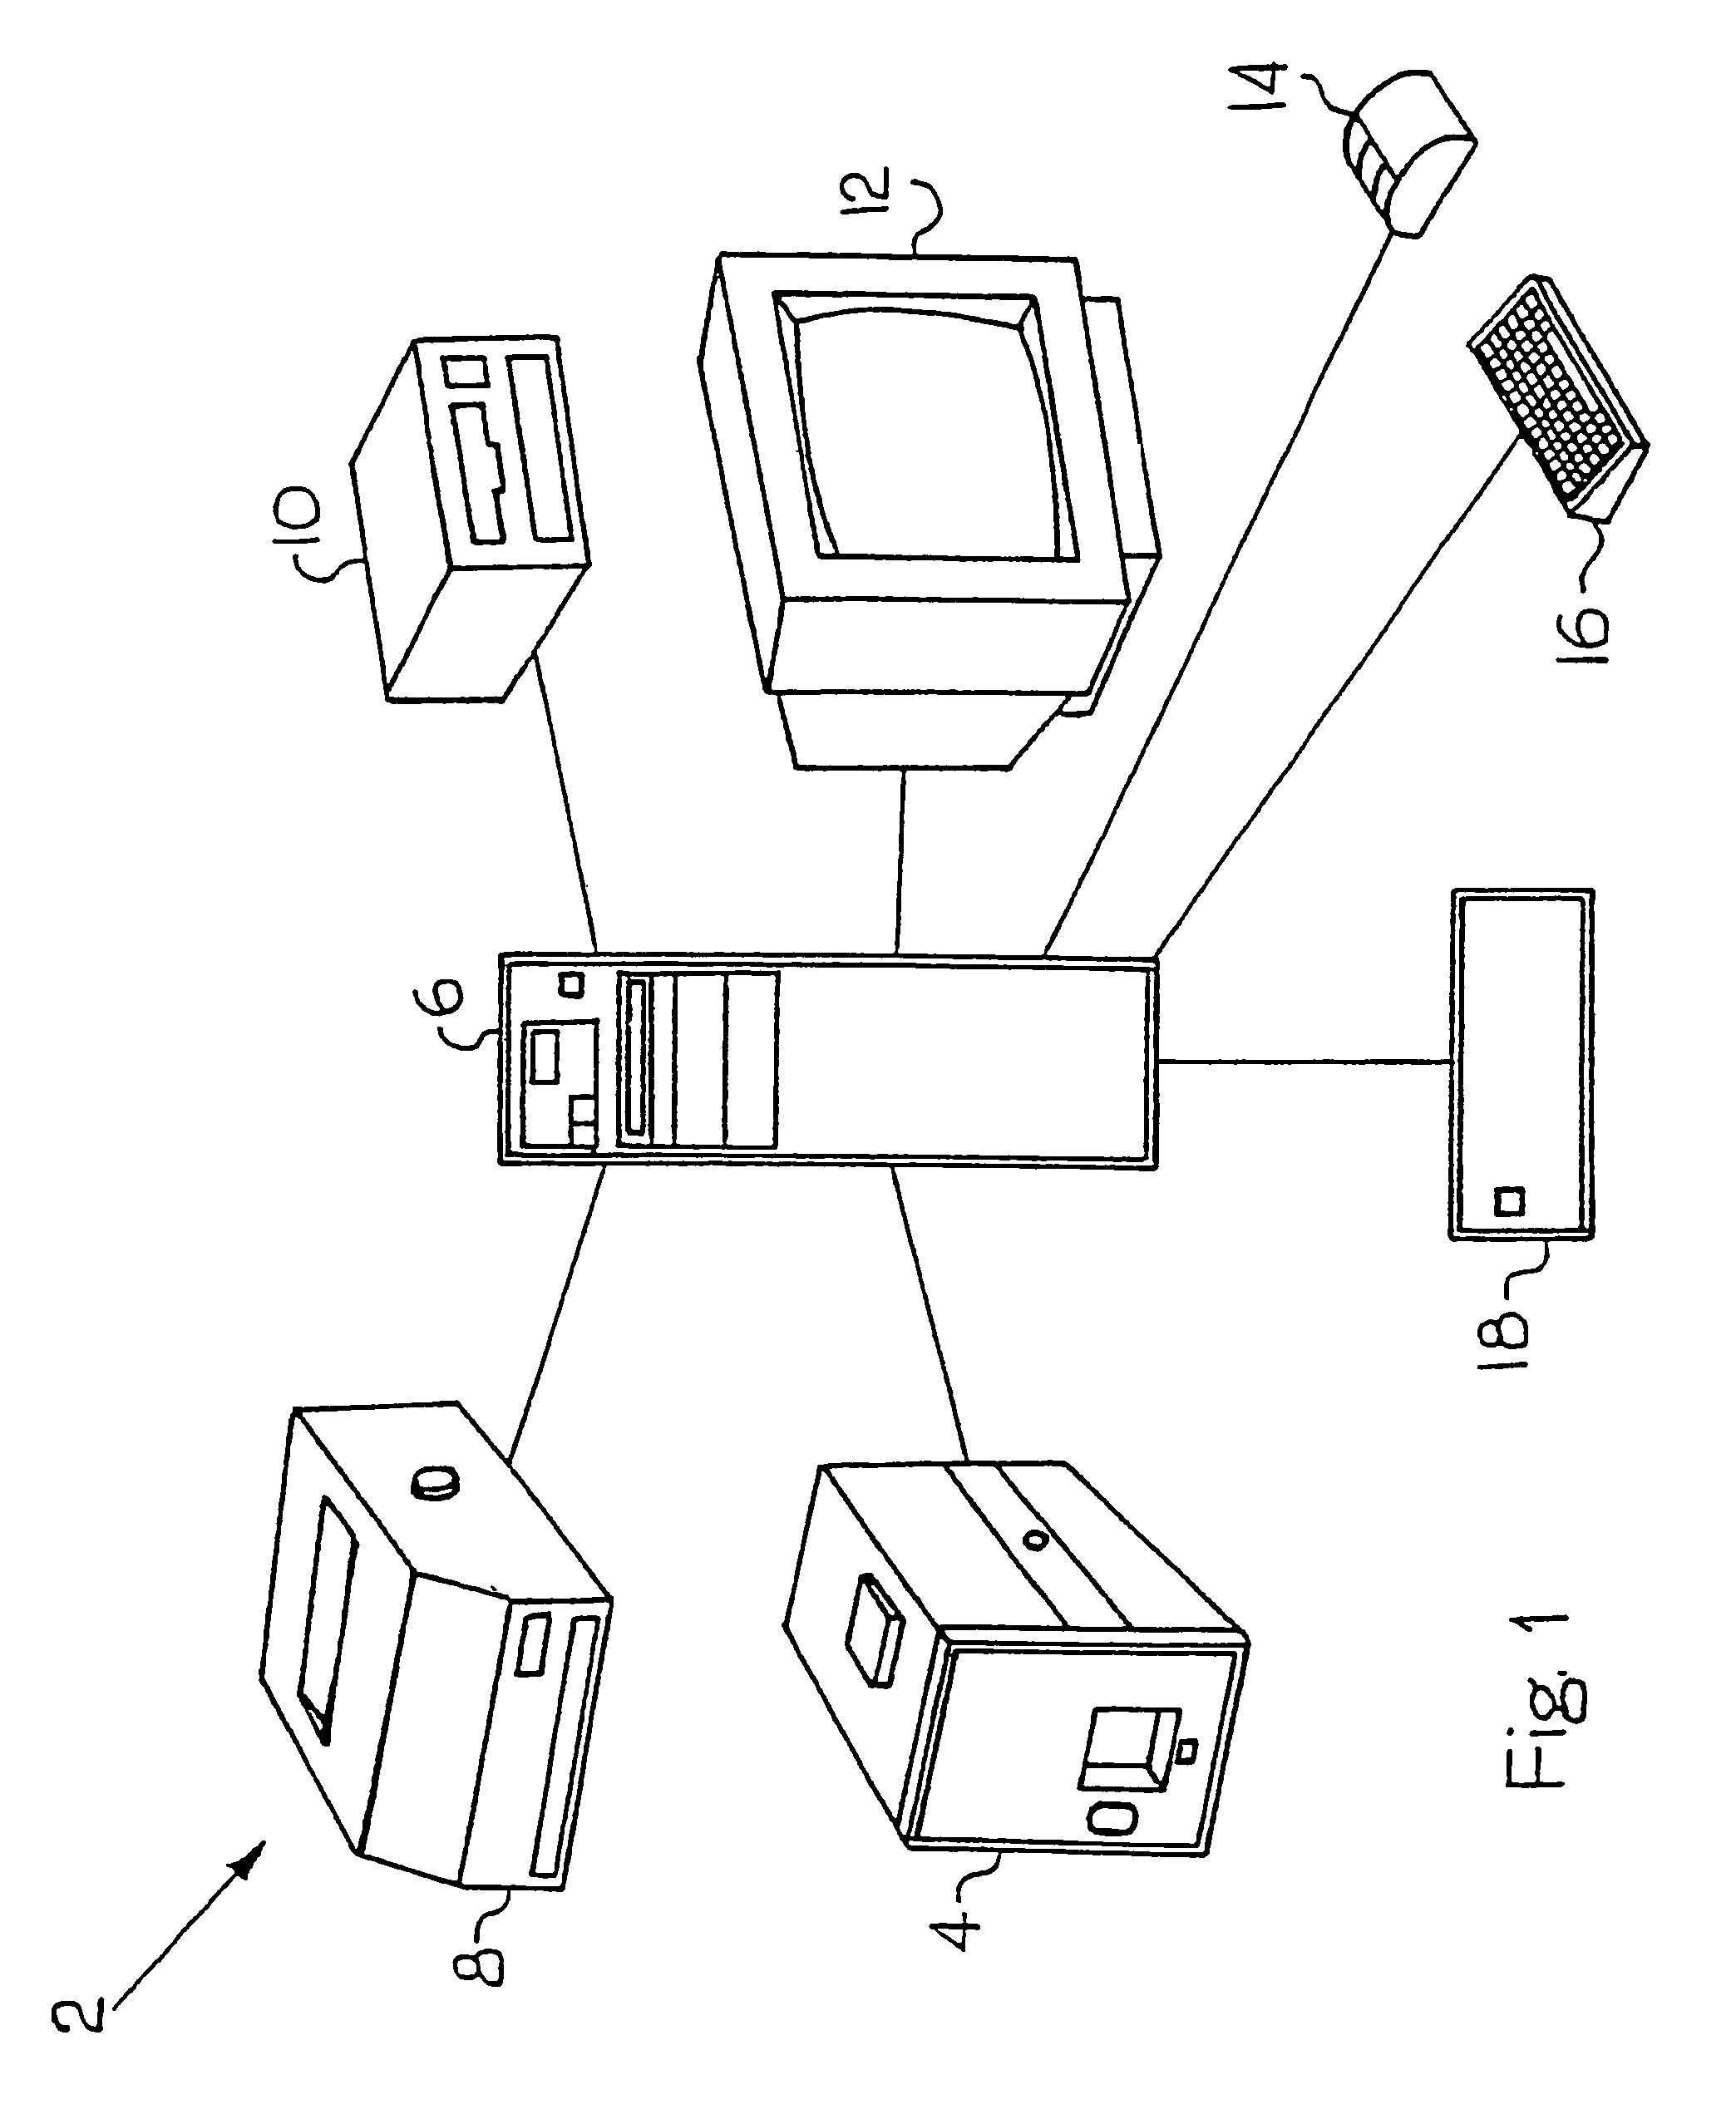 System and method for identifying and classifying dynamic thermodynamic processes in mammals and discriminating between and among such processes